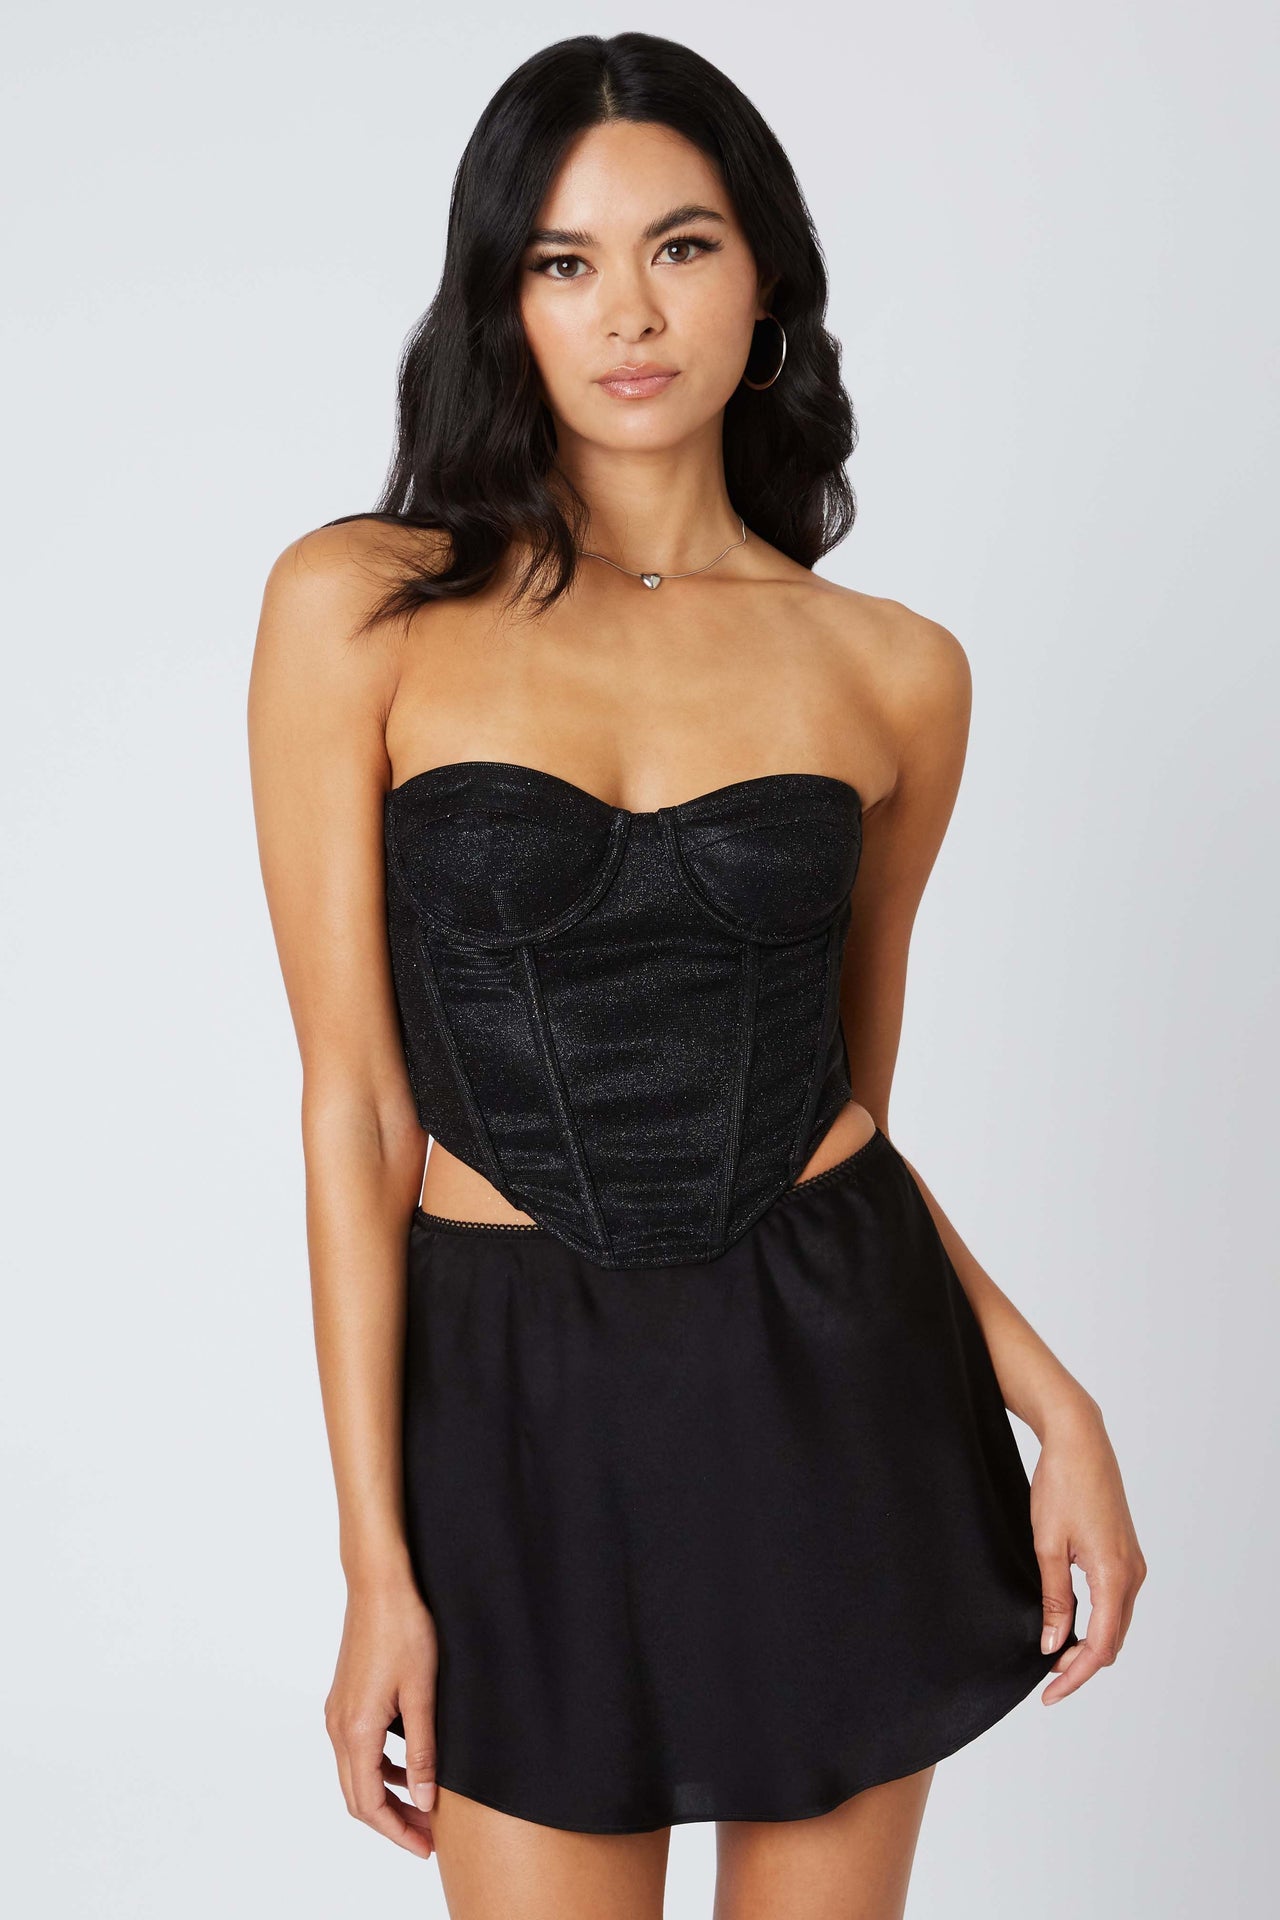 Hold Me Up Bustier Top Black